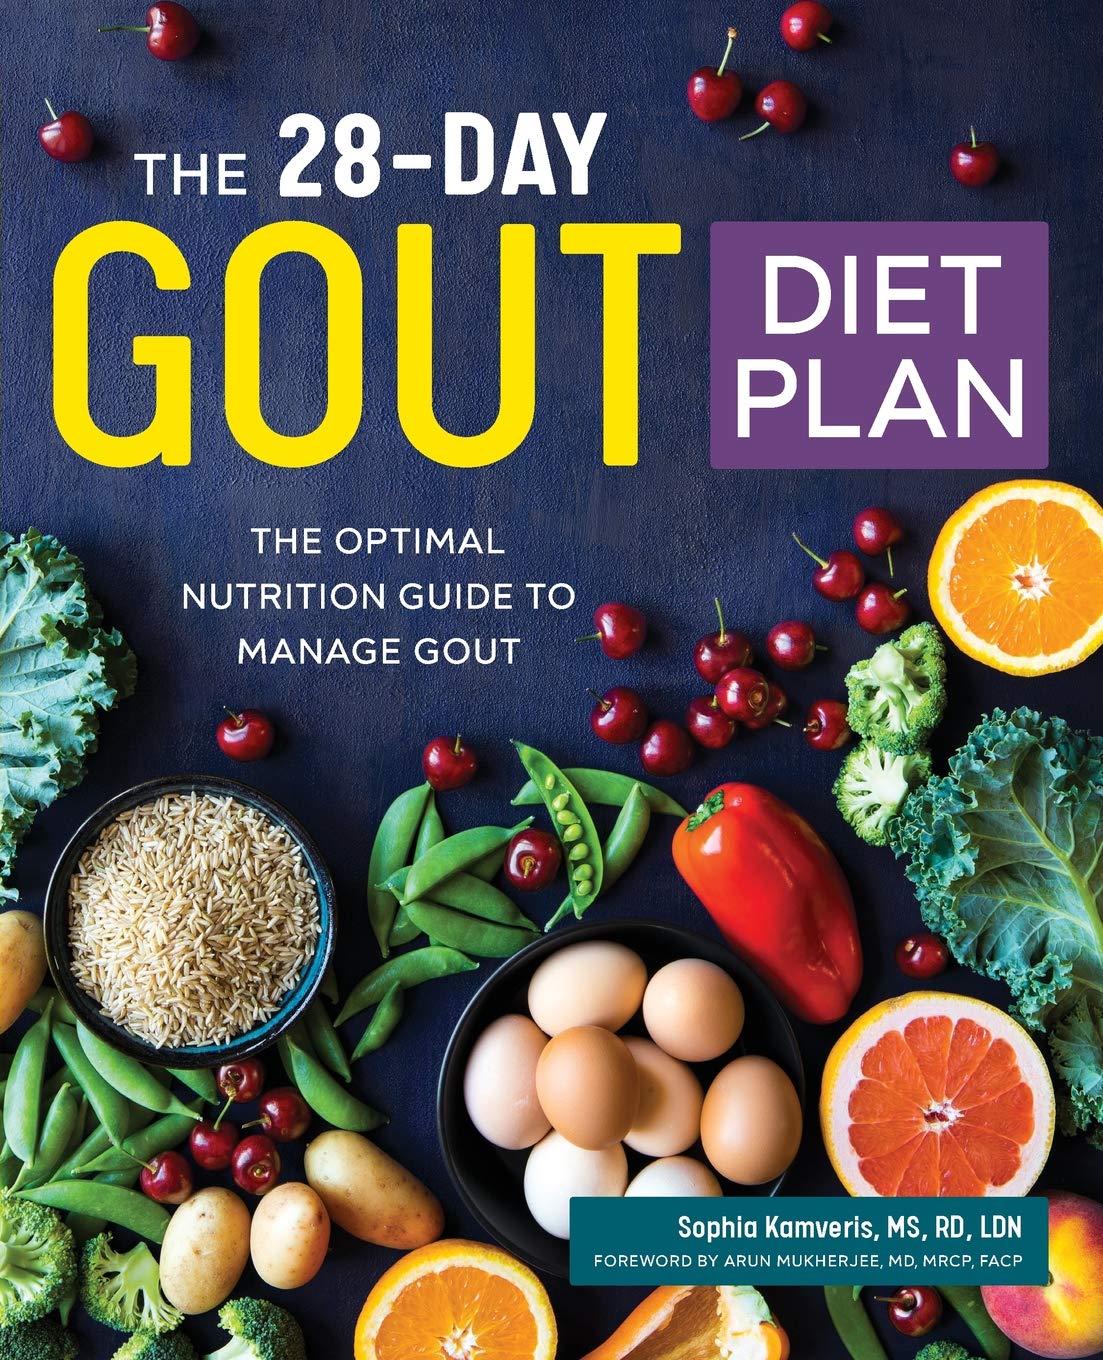 The 28-Day Gout Diet Plan: The Optimal Nutrition Guide to Manage Gout (Sophia Kamveris, M.S., R.D., L.D.N.)